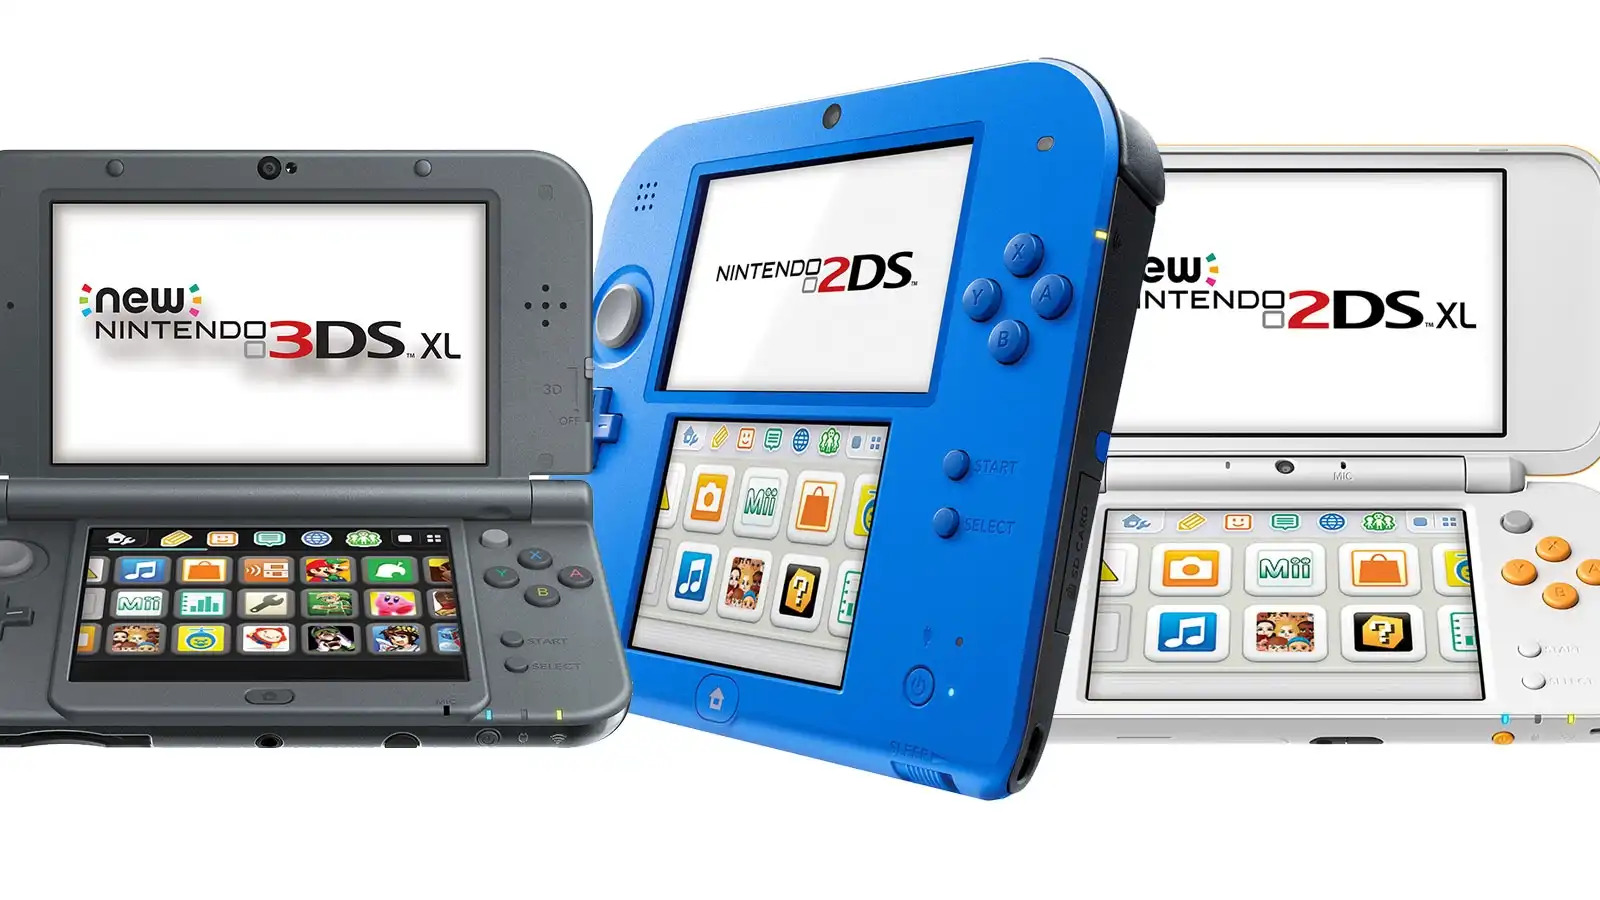 Nintendo 3DS's variants cater to everyone's preference